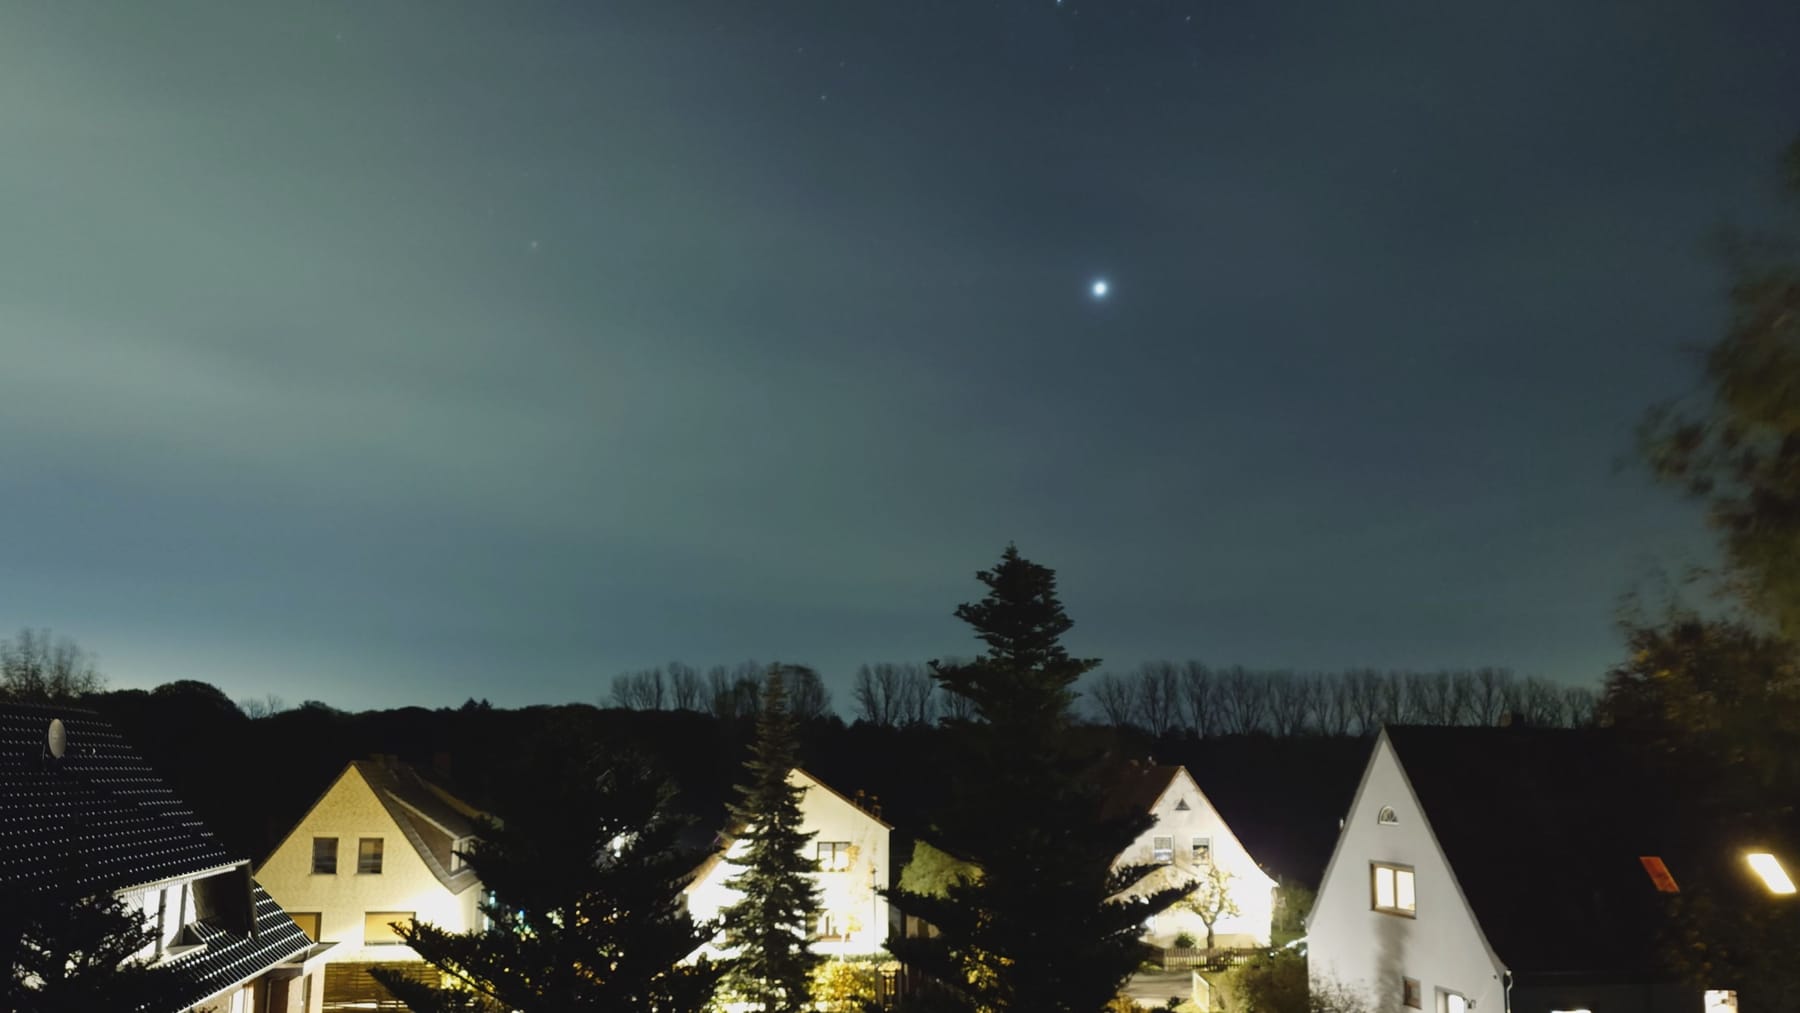 Jupiter in the night sky over Lower Saxony – visible with the naked eye